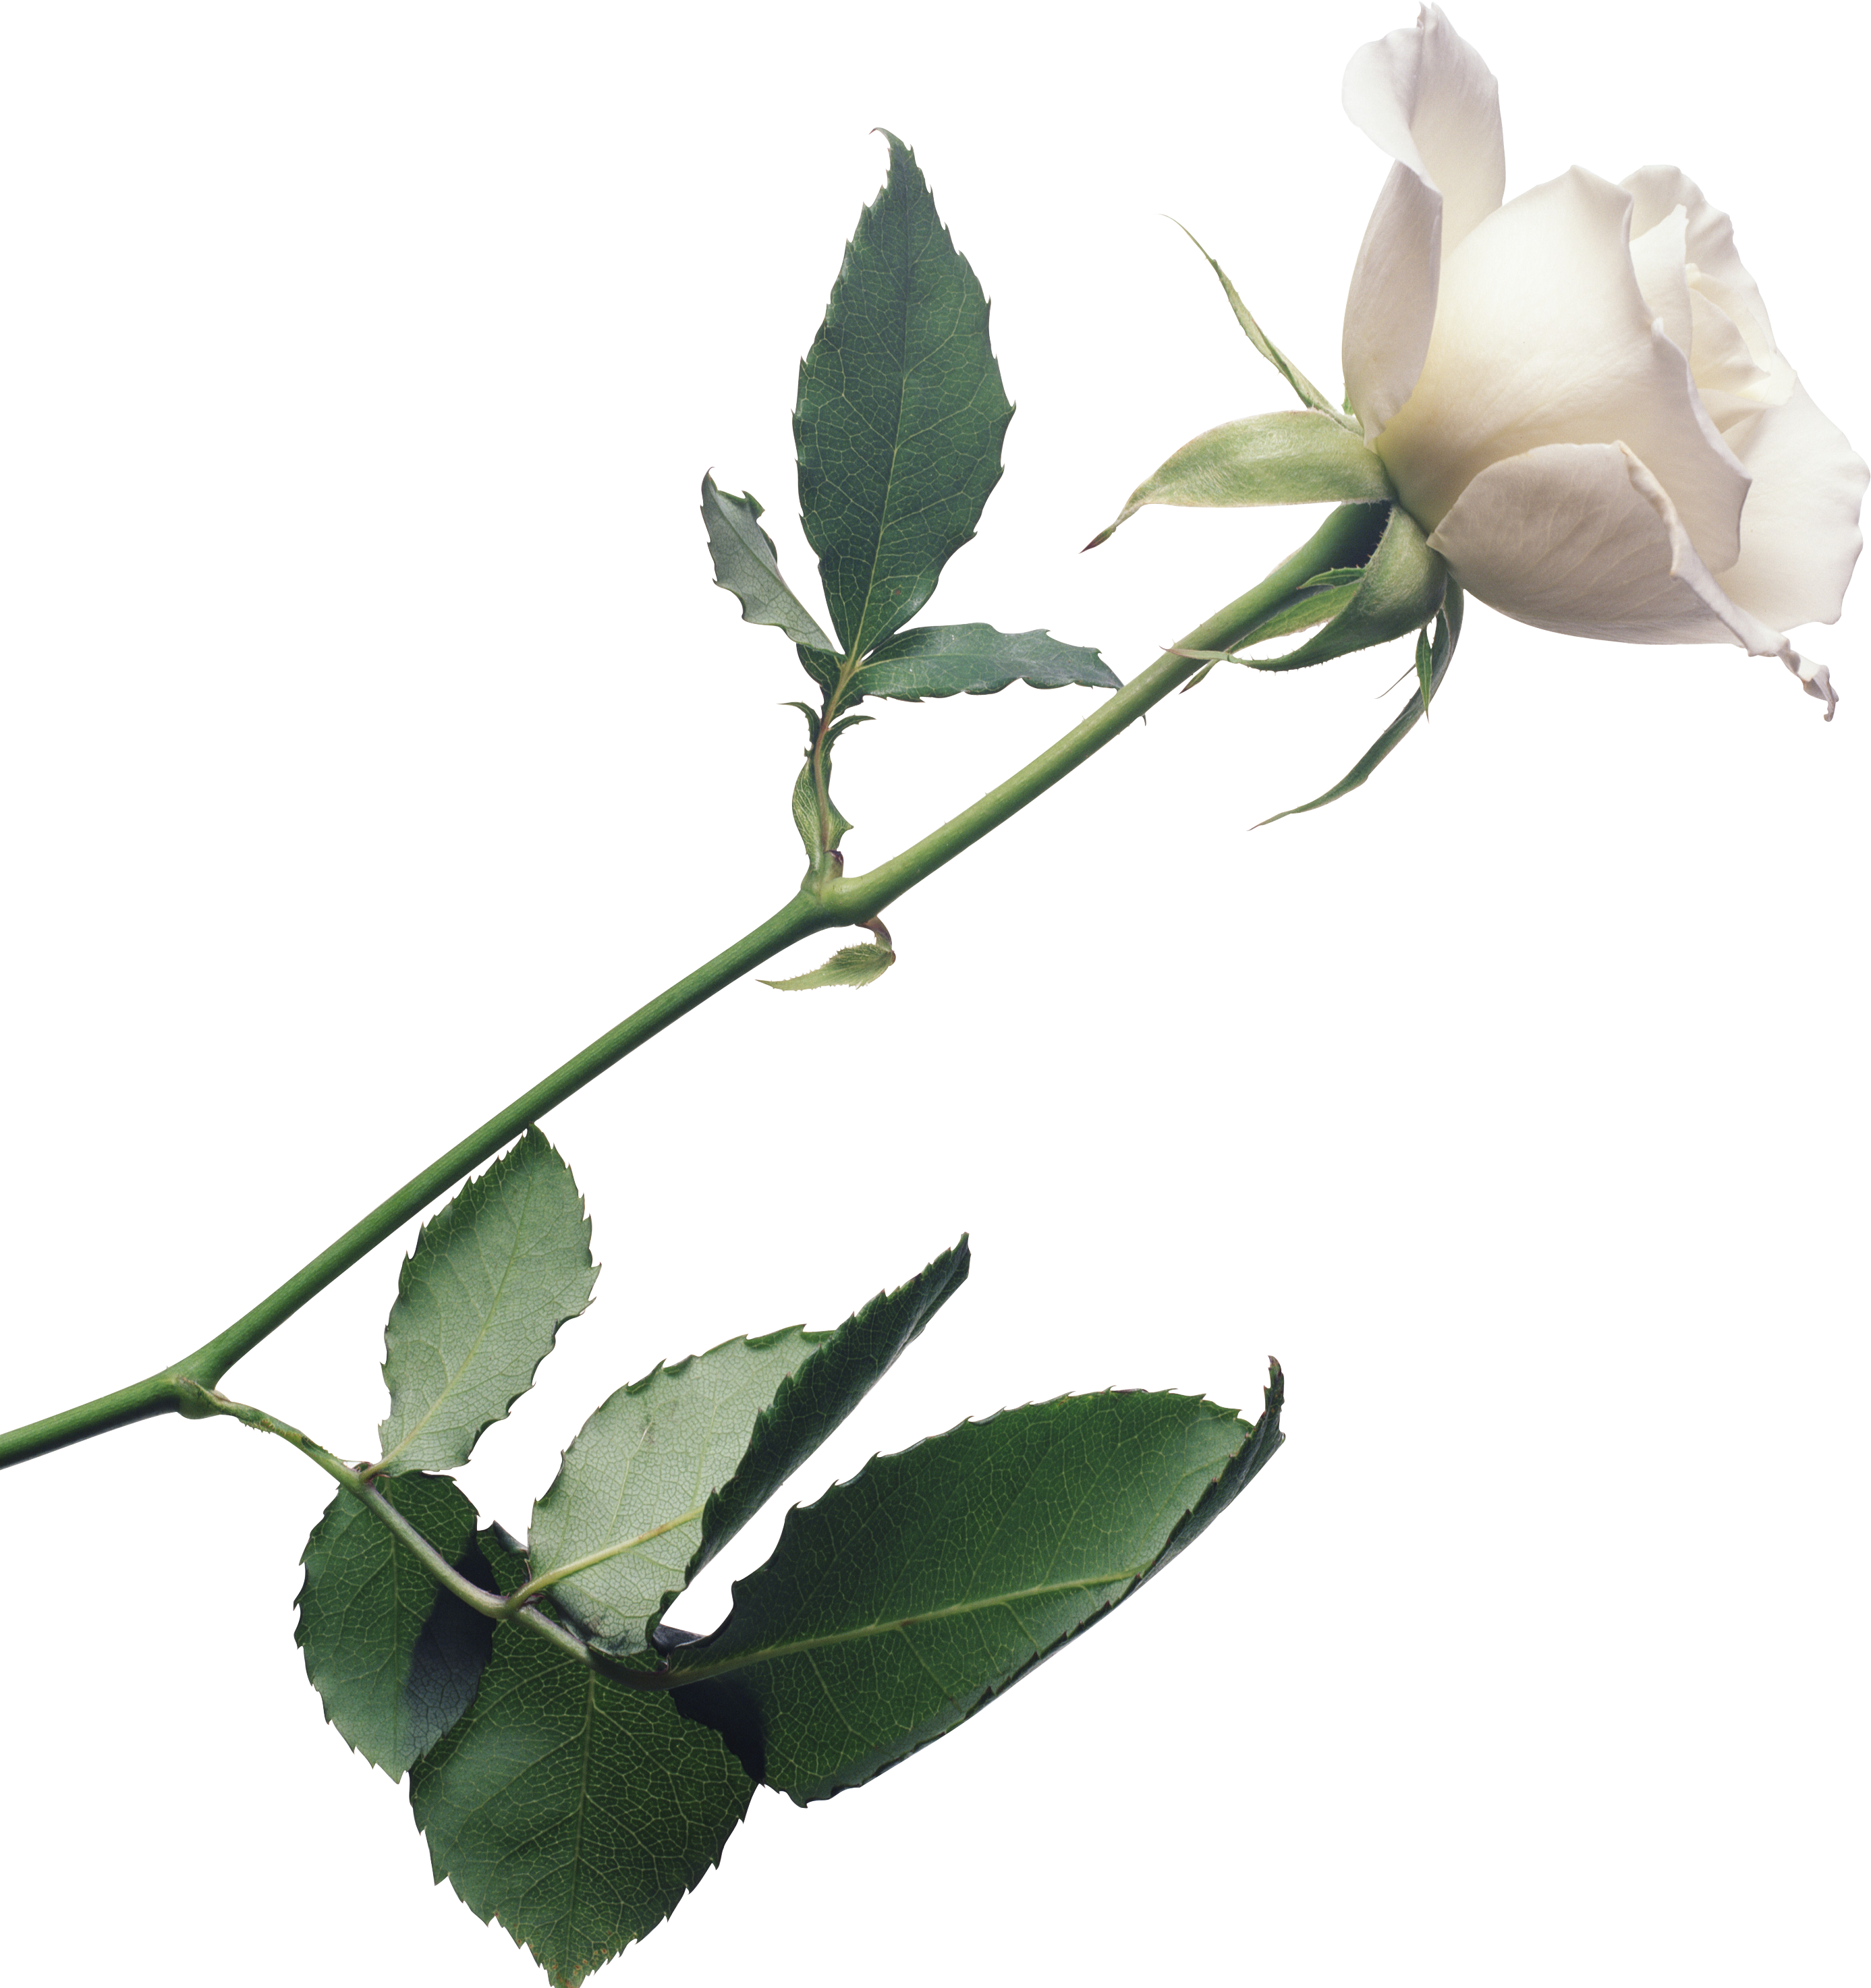 White roses PNG images, free download flower pixtures